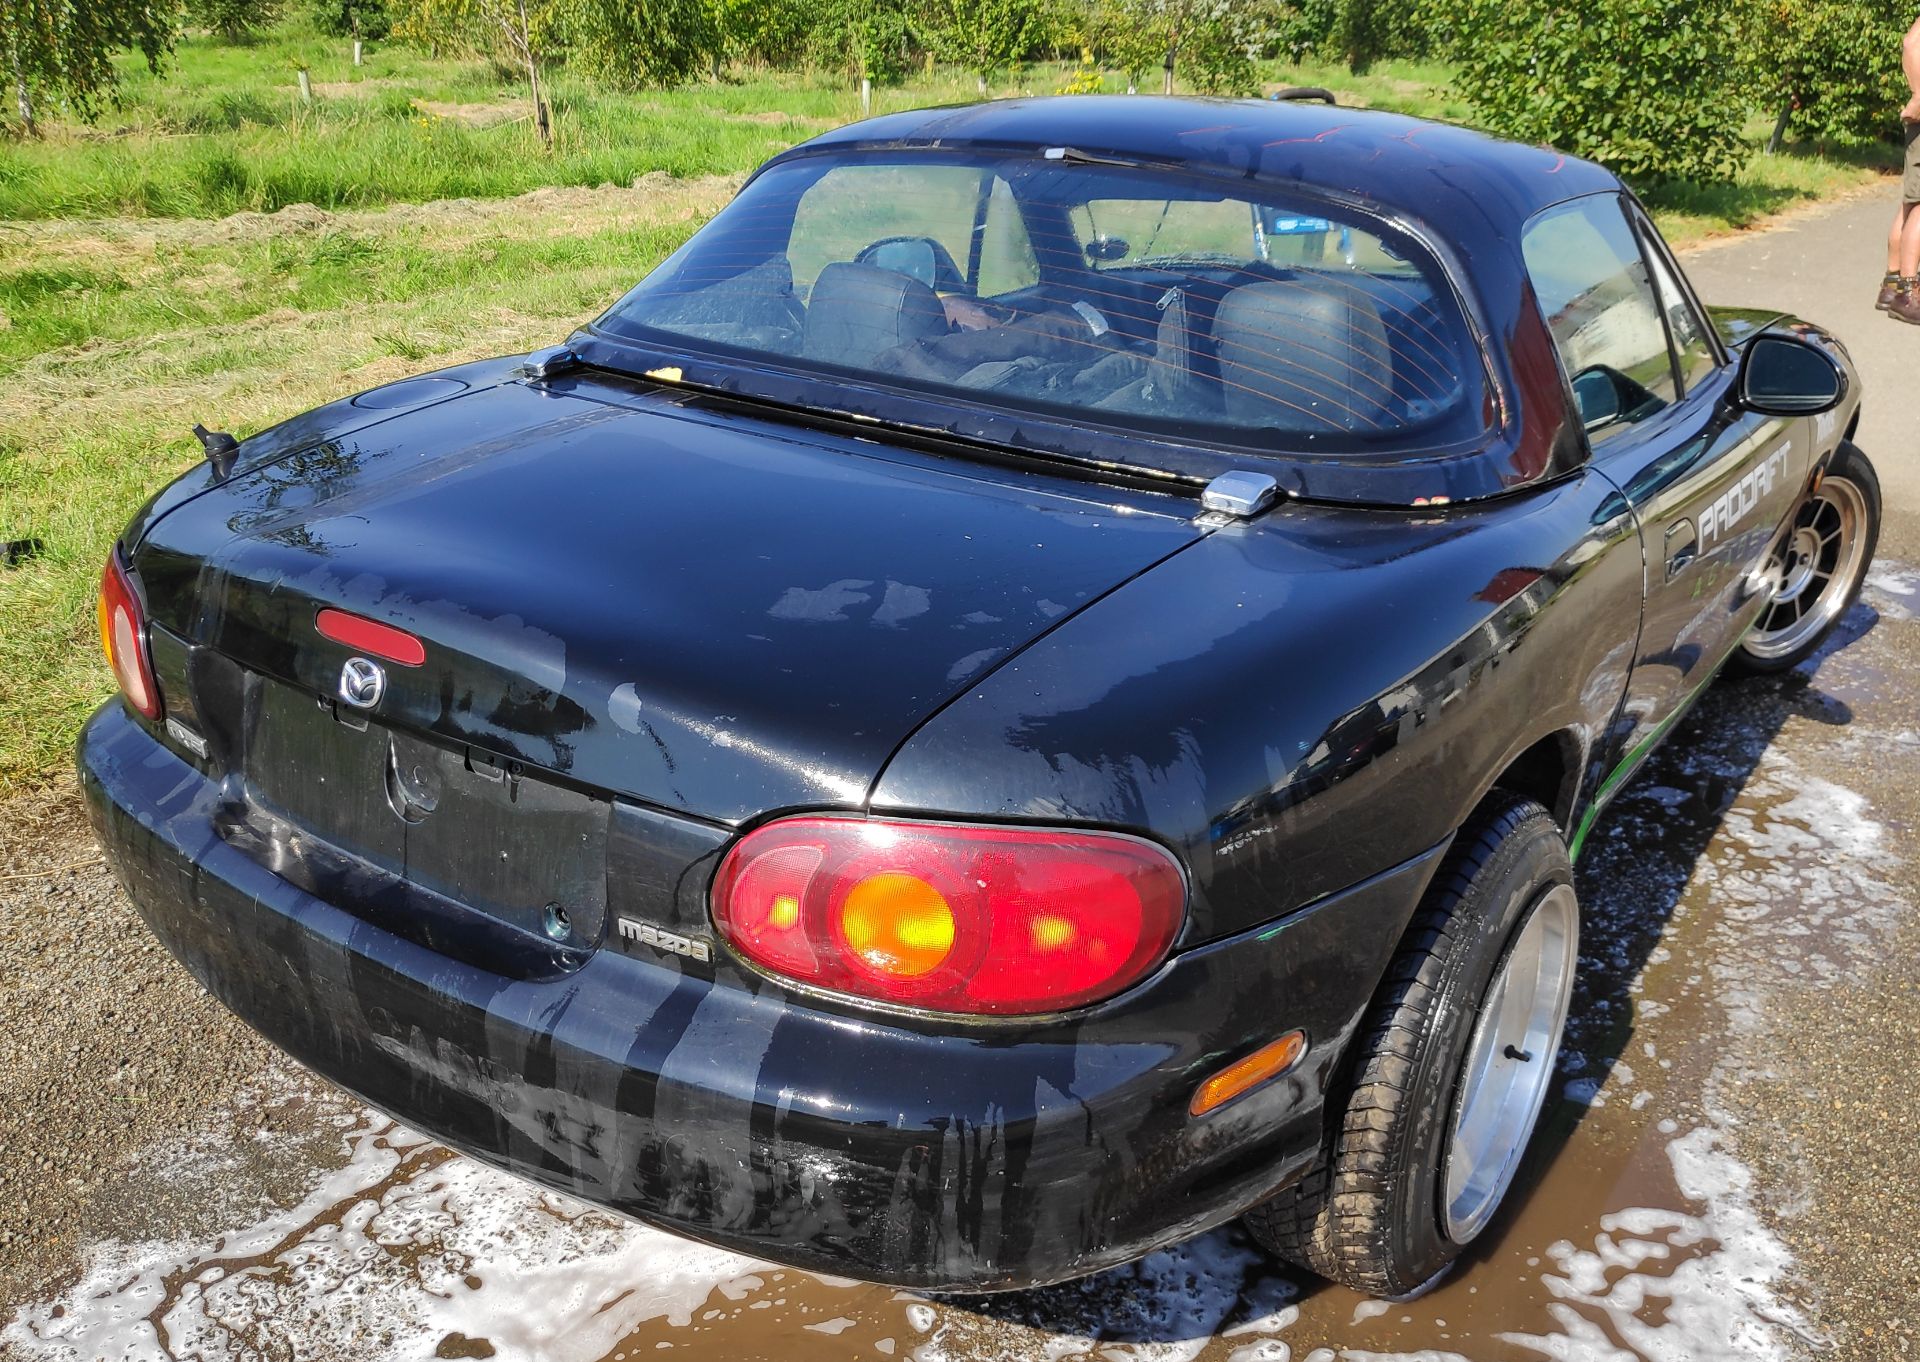 1 x 2000 Mazda MX5 Mk2 Drift Car - Includes 3 Extra Wheels/Tyres - Ref: T4 - CL682 - Location: Bedfo - Image 4 of 77